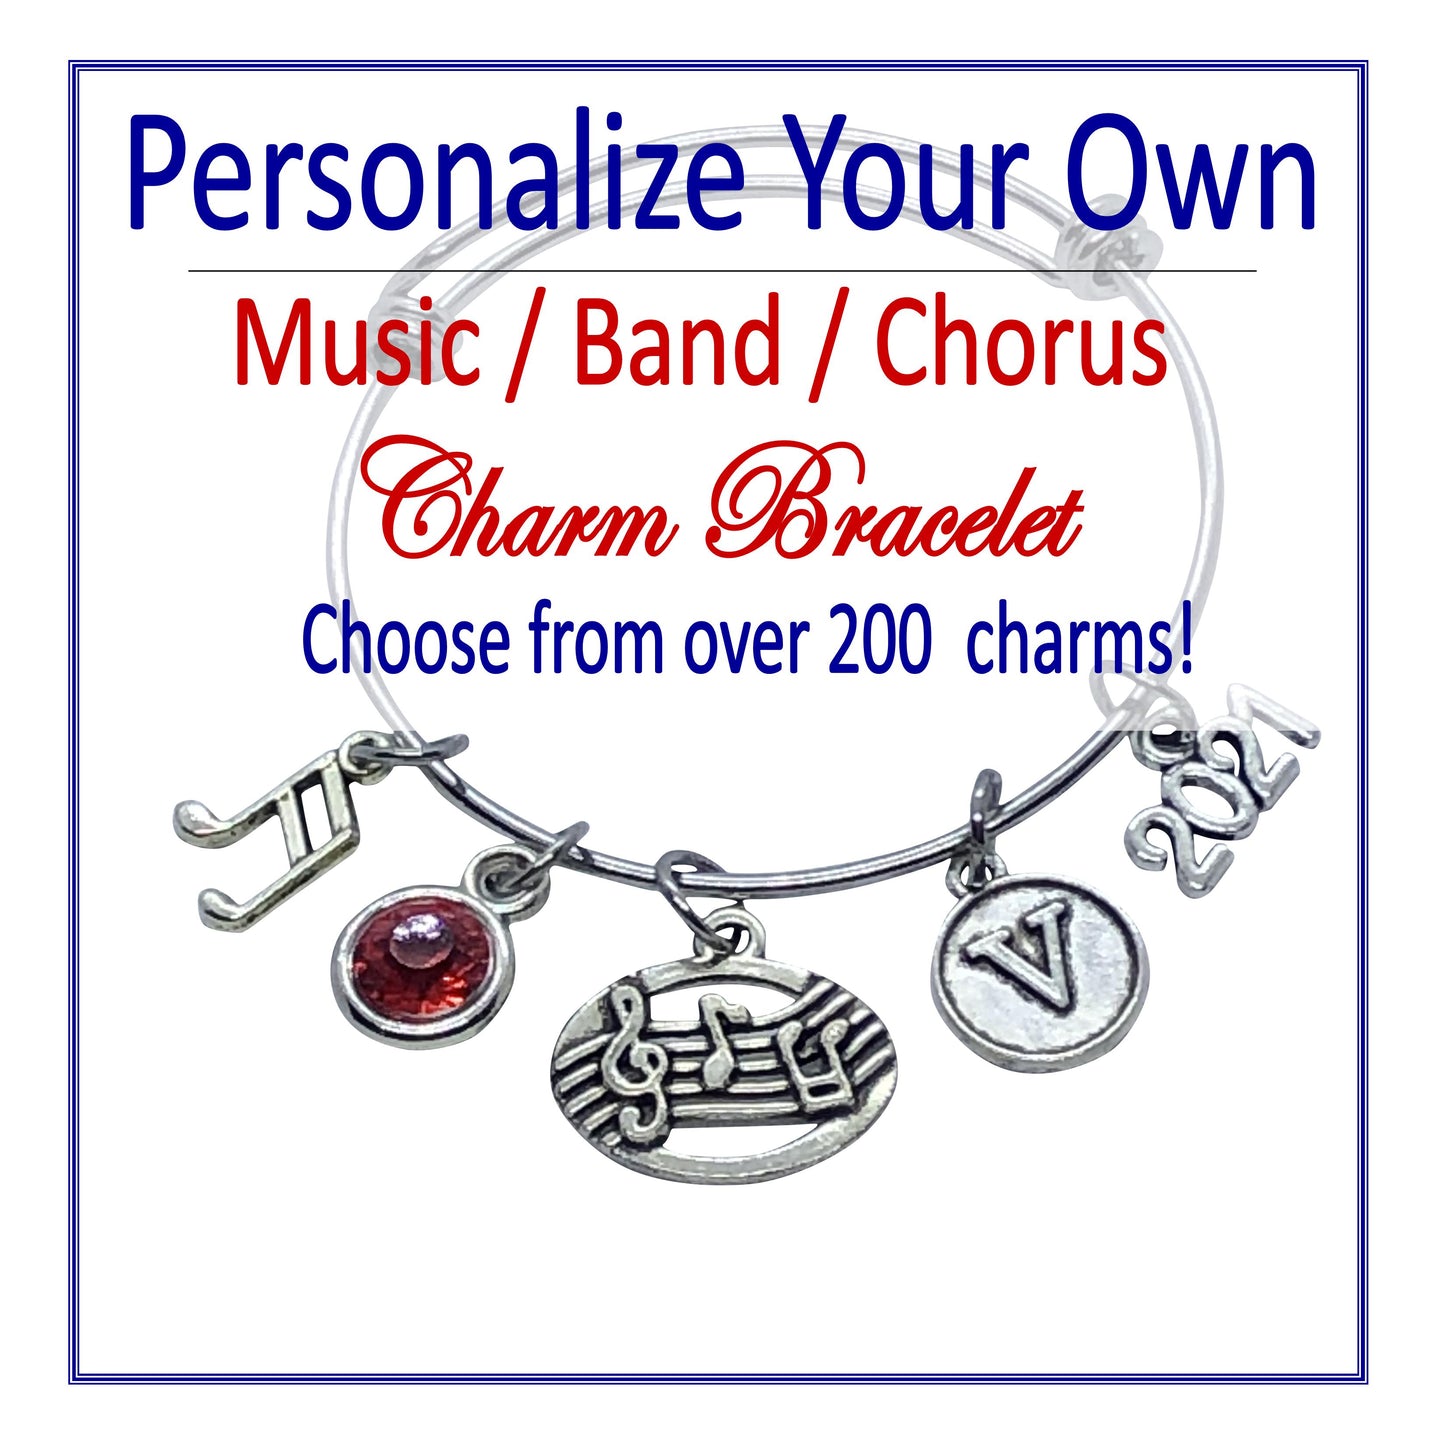 Create Your Own Music Charm Bracelet - Cheer and Dance On Demand